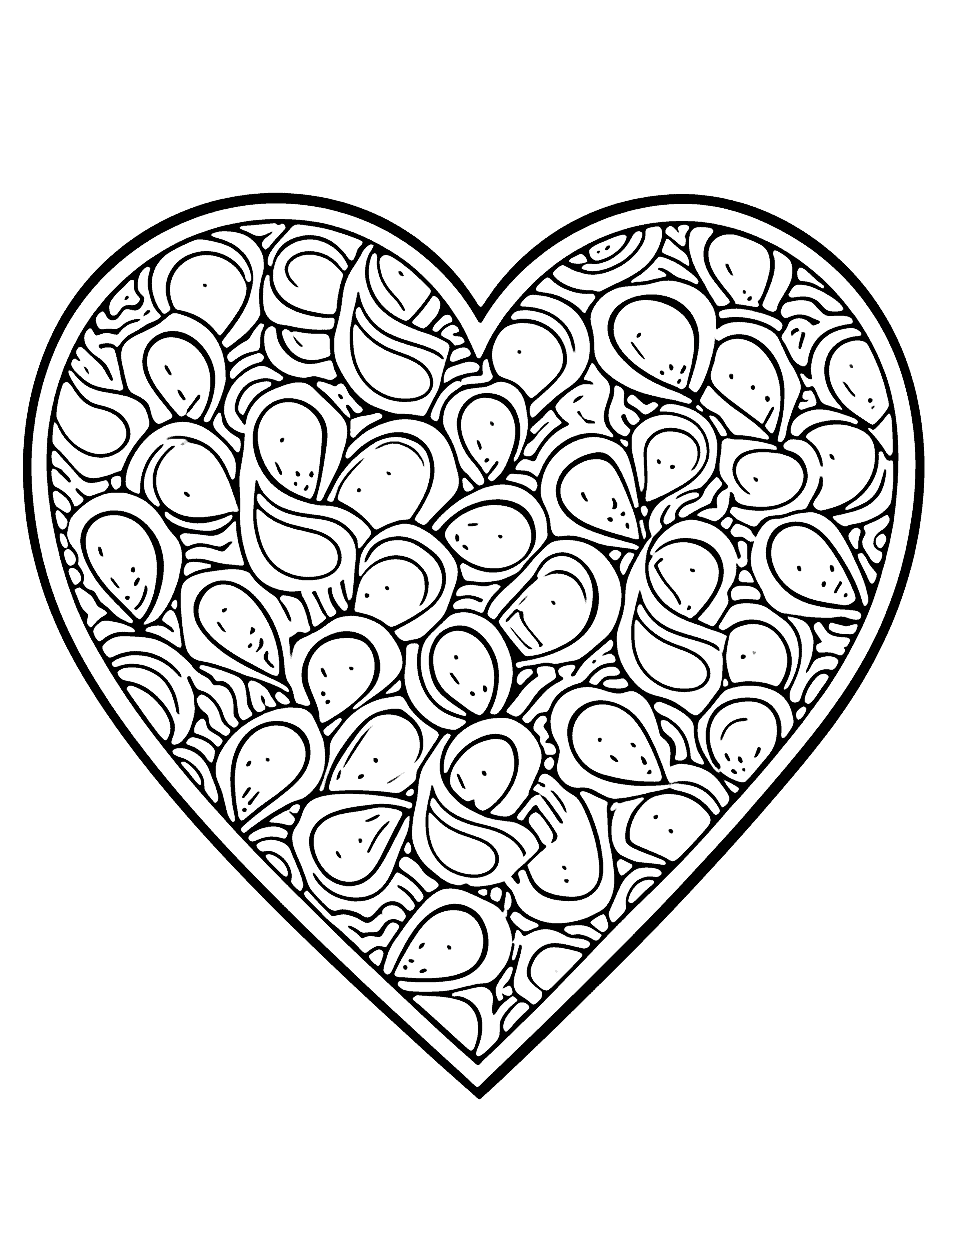 Heart Pizza Coloring Page - A heart-shaped pizza with various toppings to color.